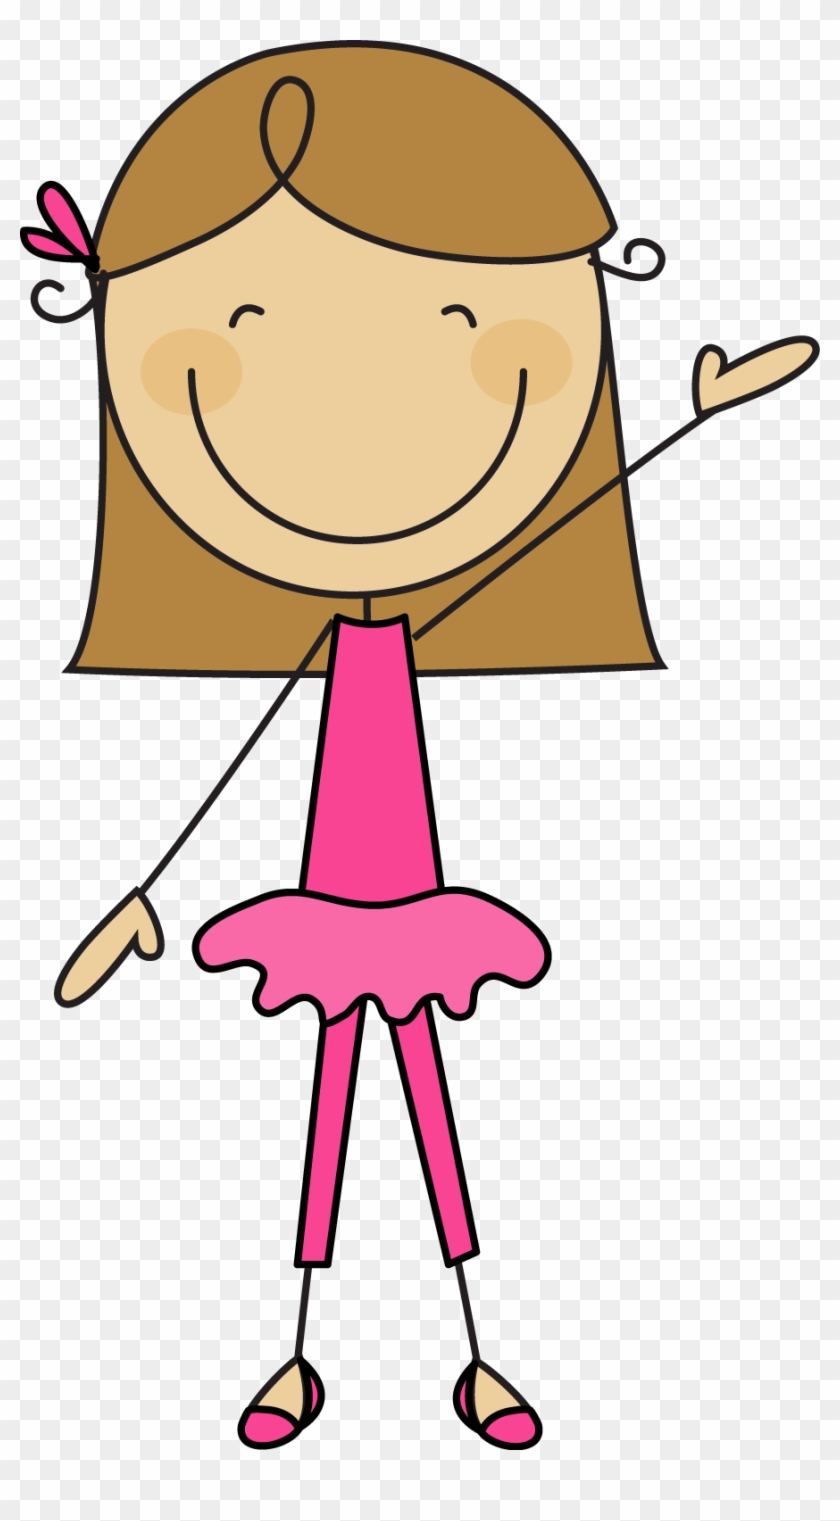 Stick Figure Of A Girl - Girl Stick Figure Cartoon - Free Transparent PNG  Clipart Images Download